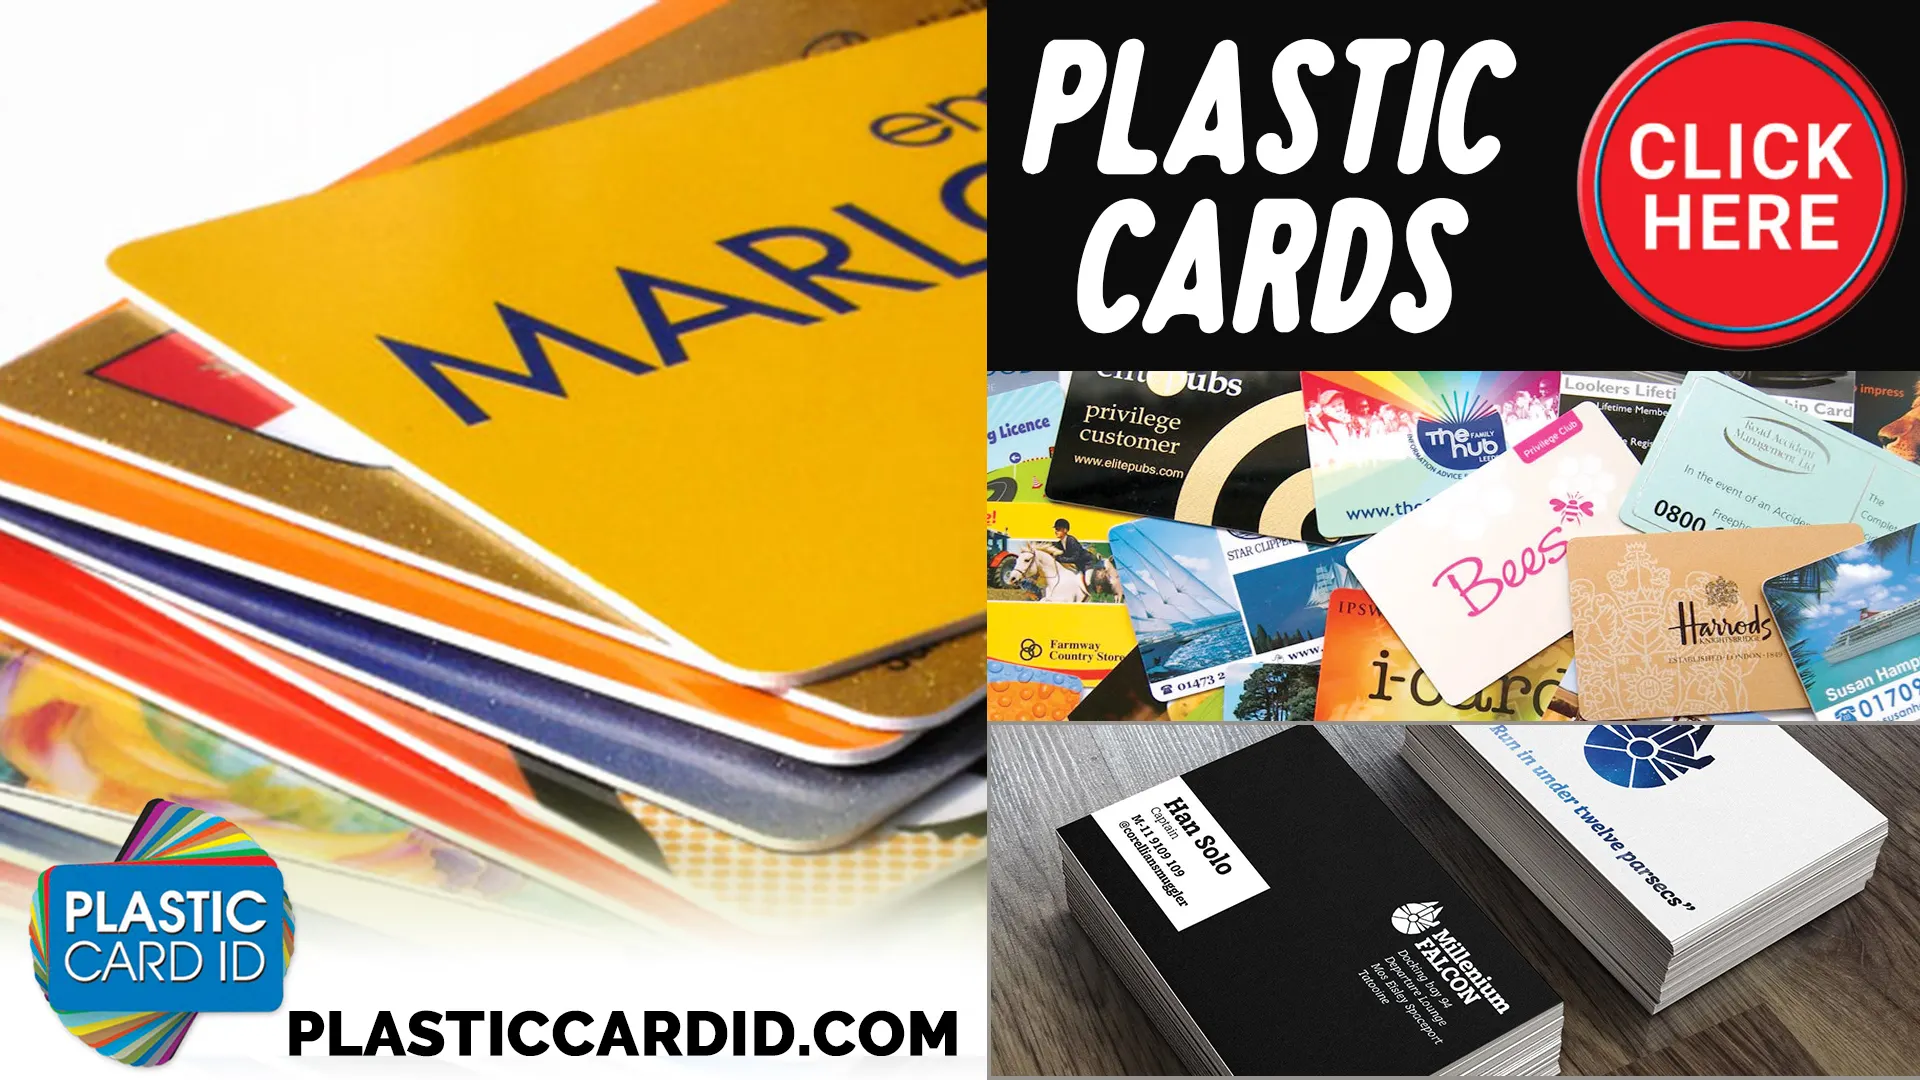 Customization Options Galore with Plastic Card ID
